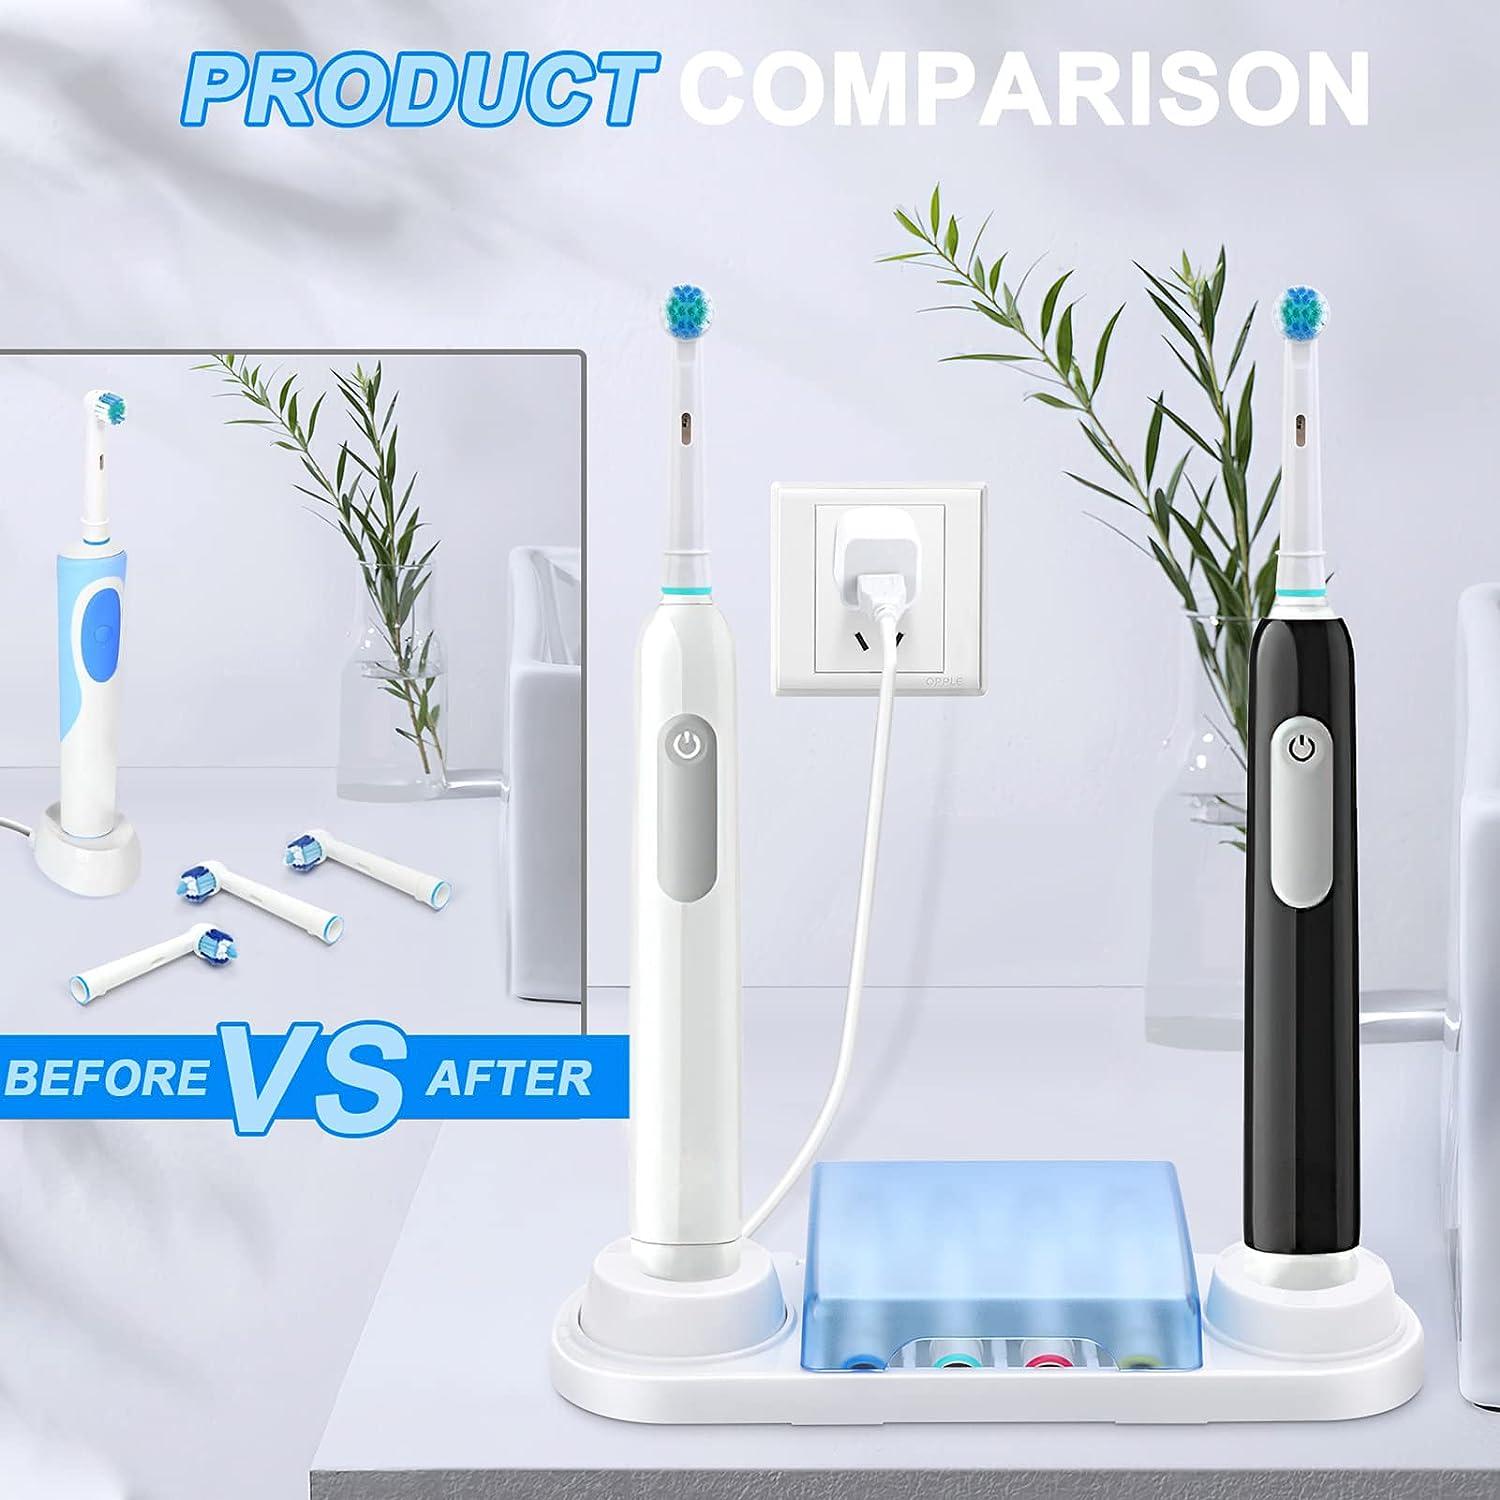 Oral B Electric Toothbrush Holder